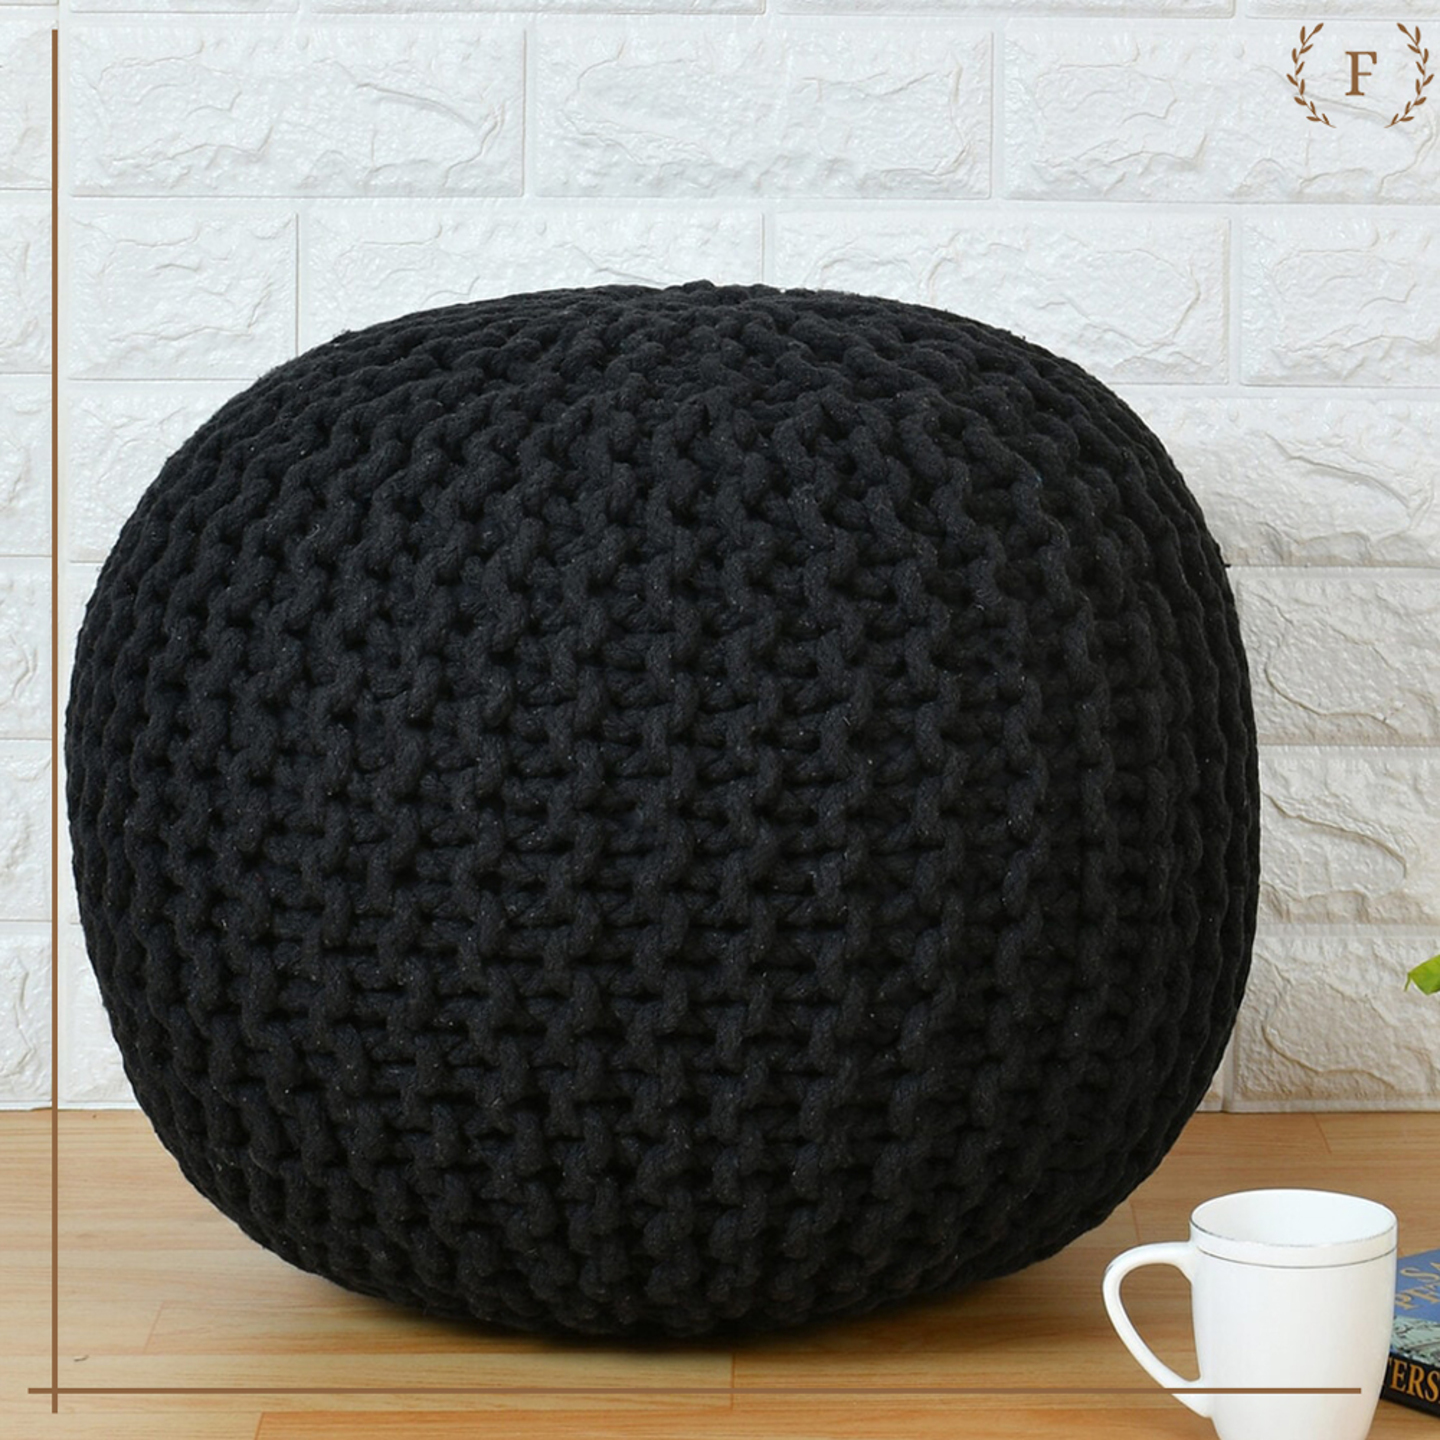 Pouffe Stools for Living Rooms|Bean Filled Stools for Foot Rest